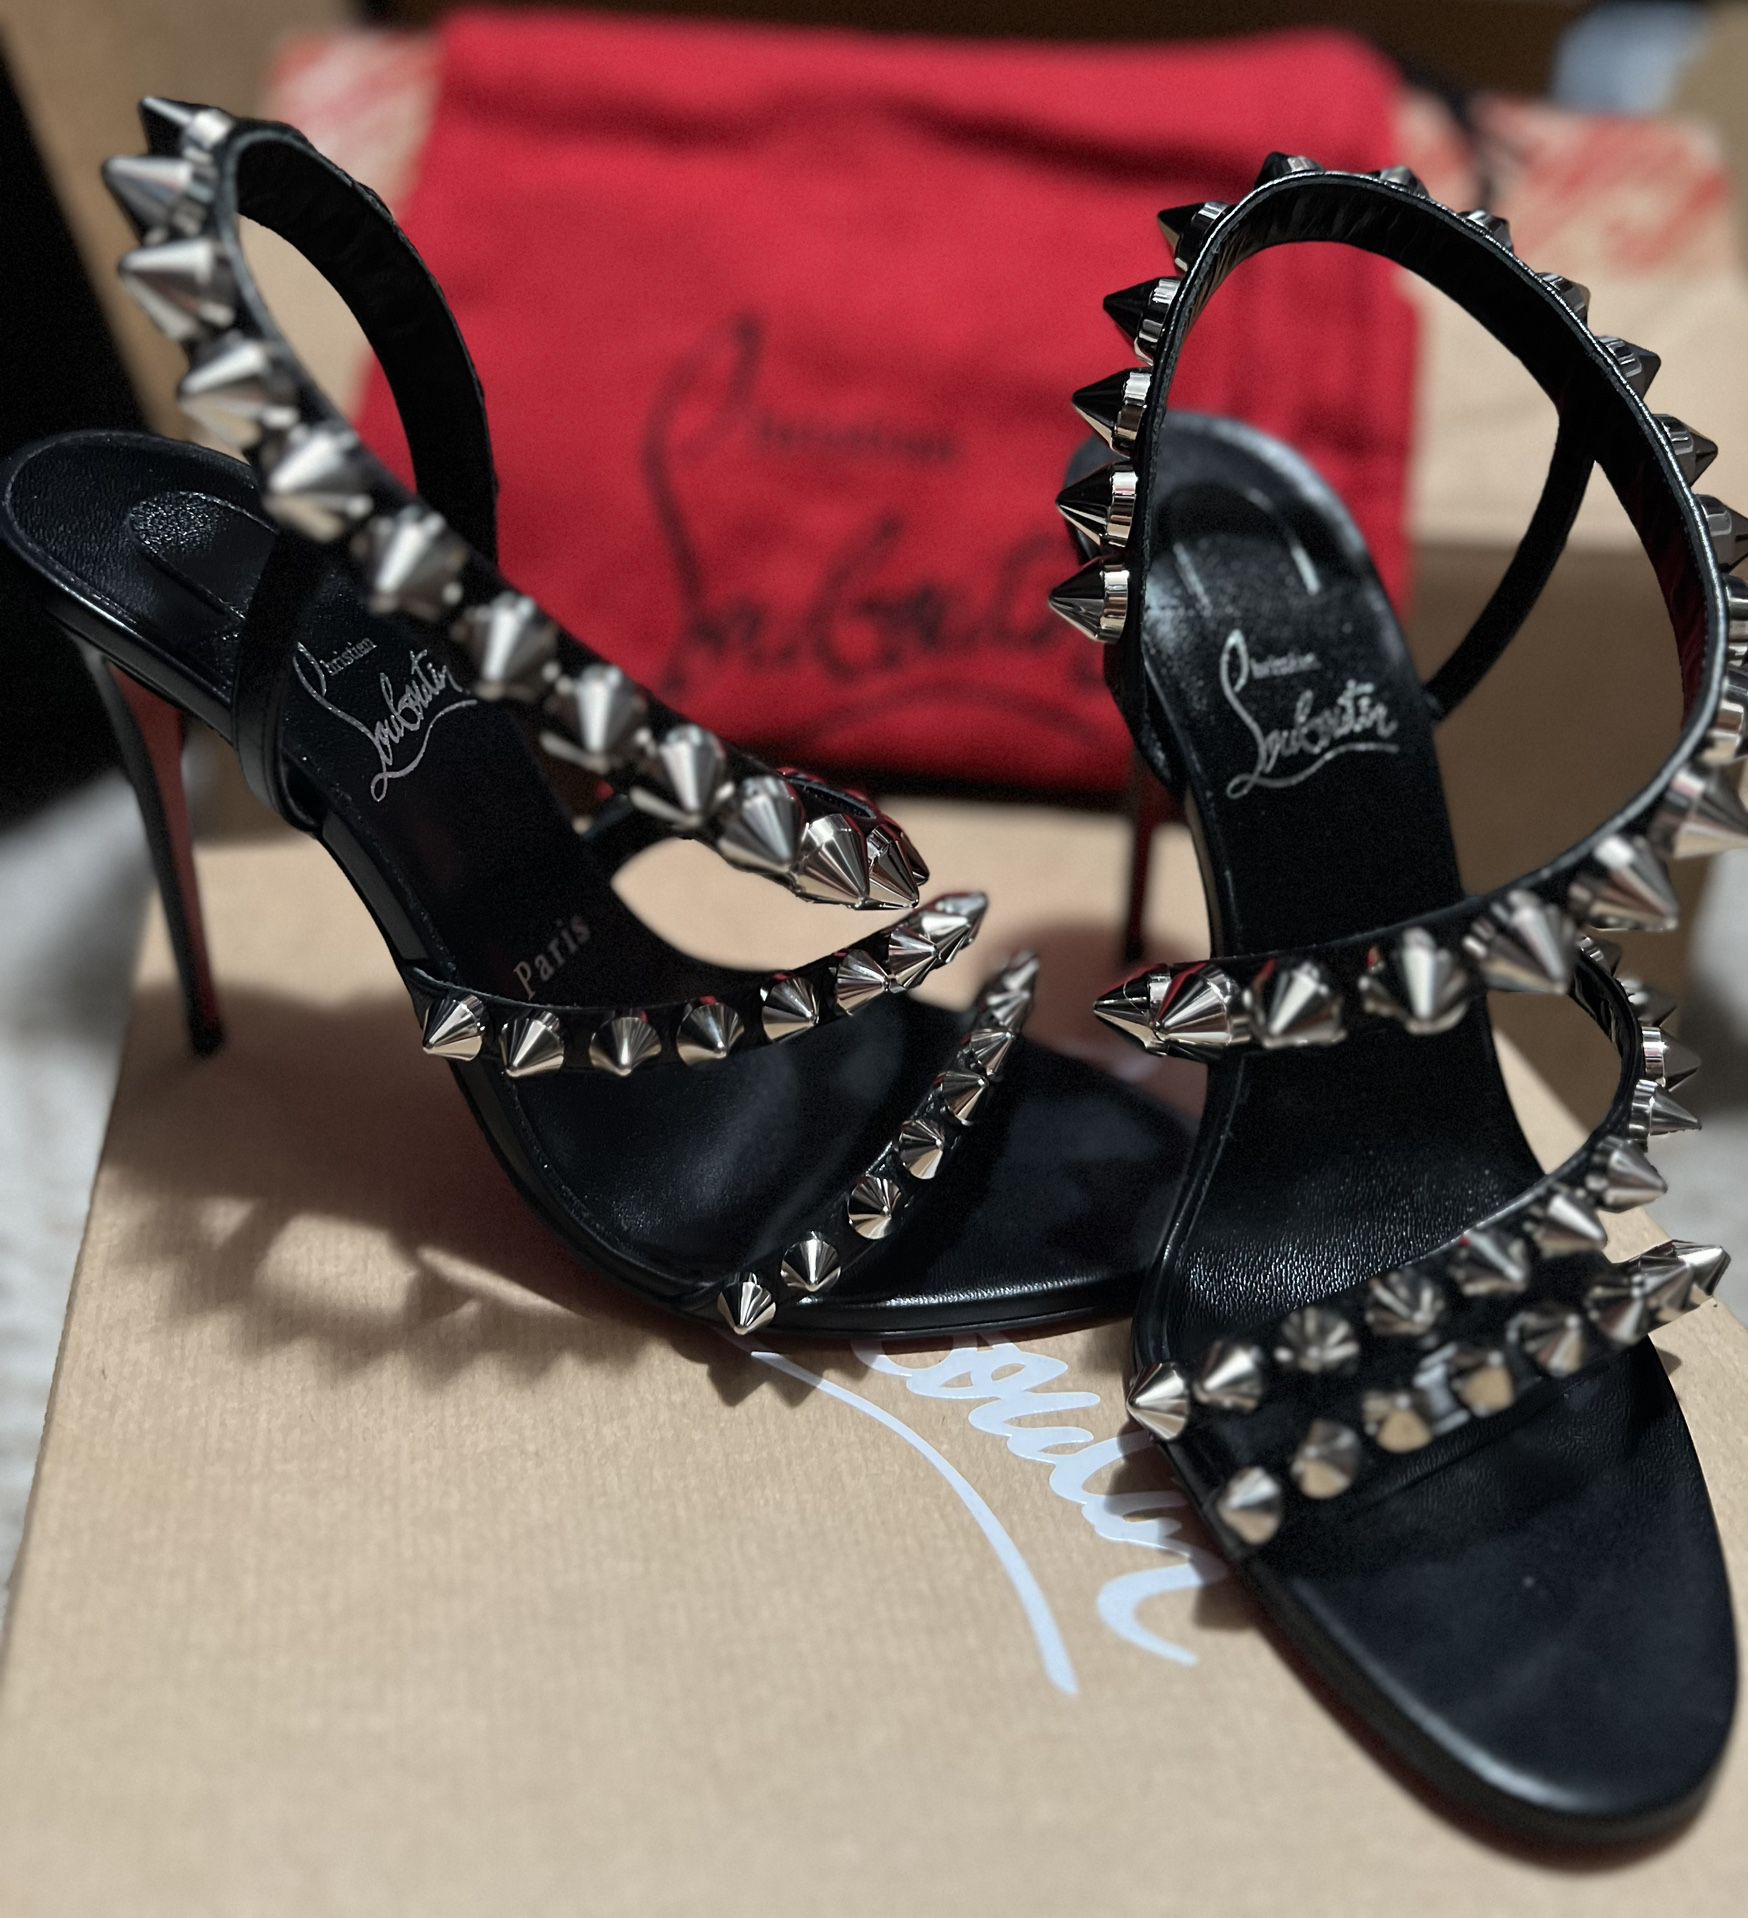 CHRISTIAN LOUBOUTIN Black Strappy Sandals Spikes Heels Pumps for Sale in Vista, CA - OfferUp